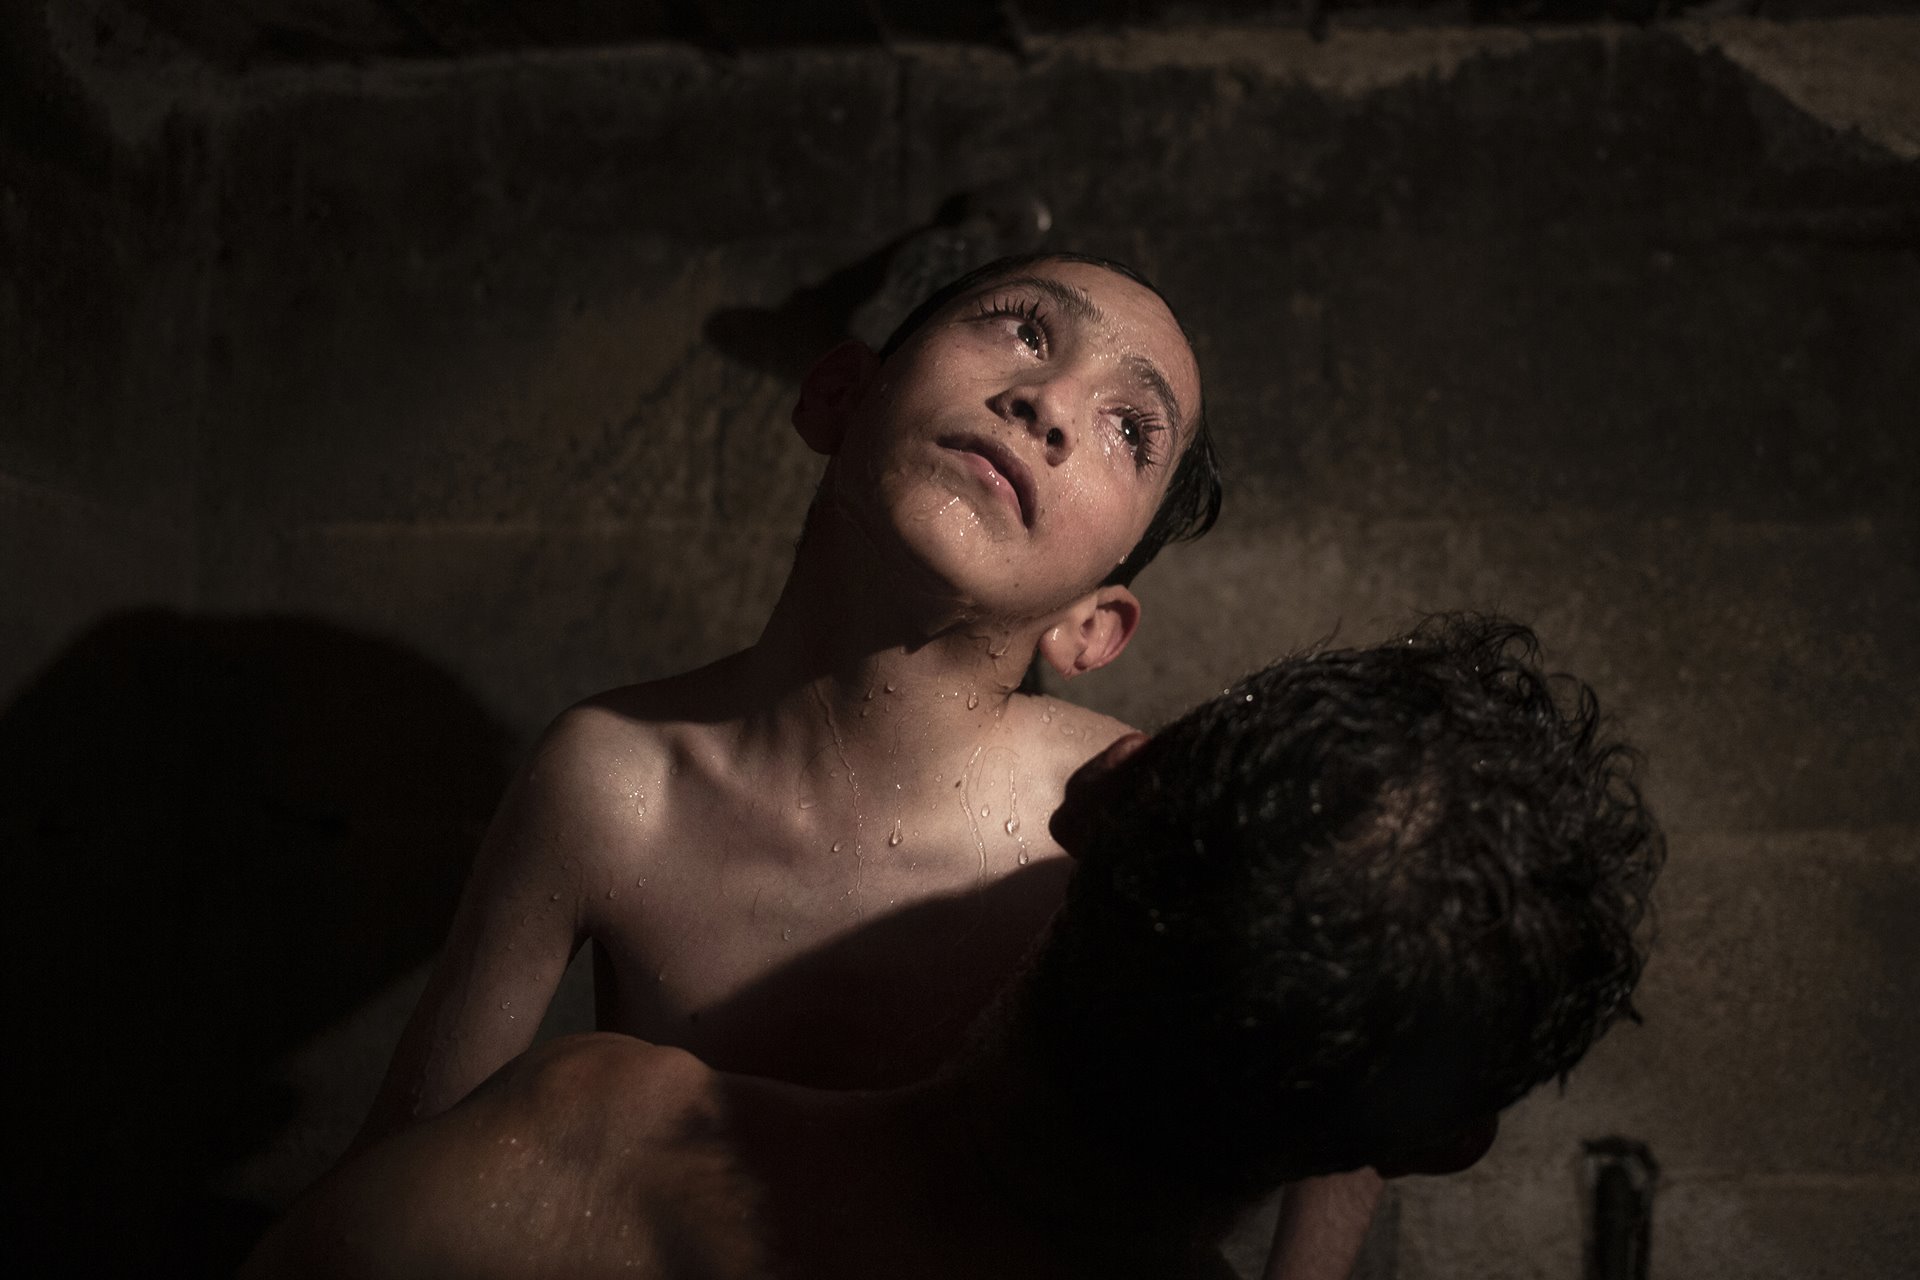 <p>Sebastián (18) baths with the help of his father Tino, in Villa Guerrero, Mexico. Sebastián lives with hydrocephalus, a neurological disorder caused by a build-up of fluids in cavities within the brain, and depends on his parents for most daily activities.</p>
